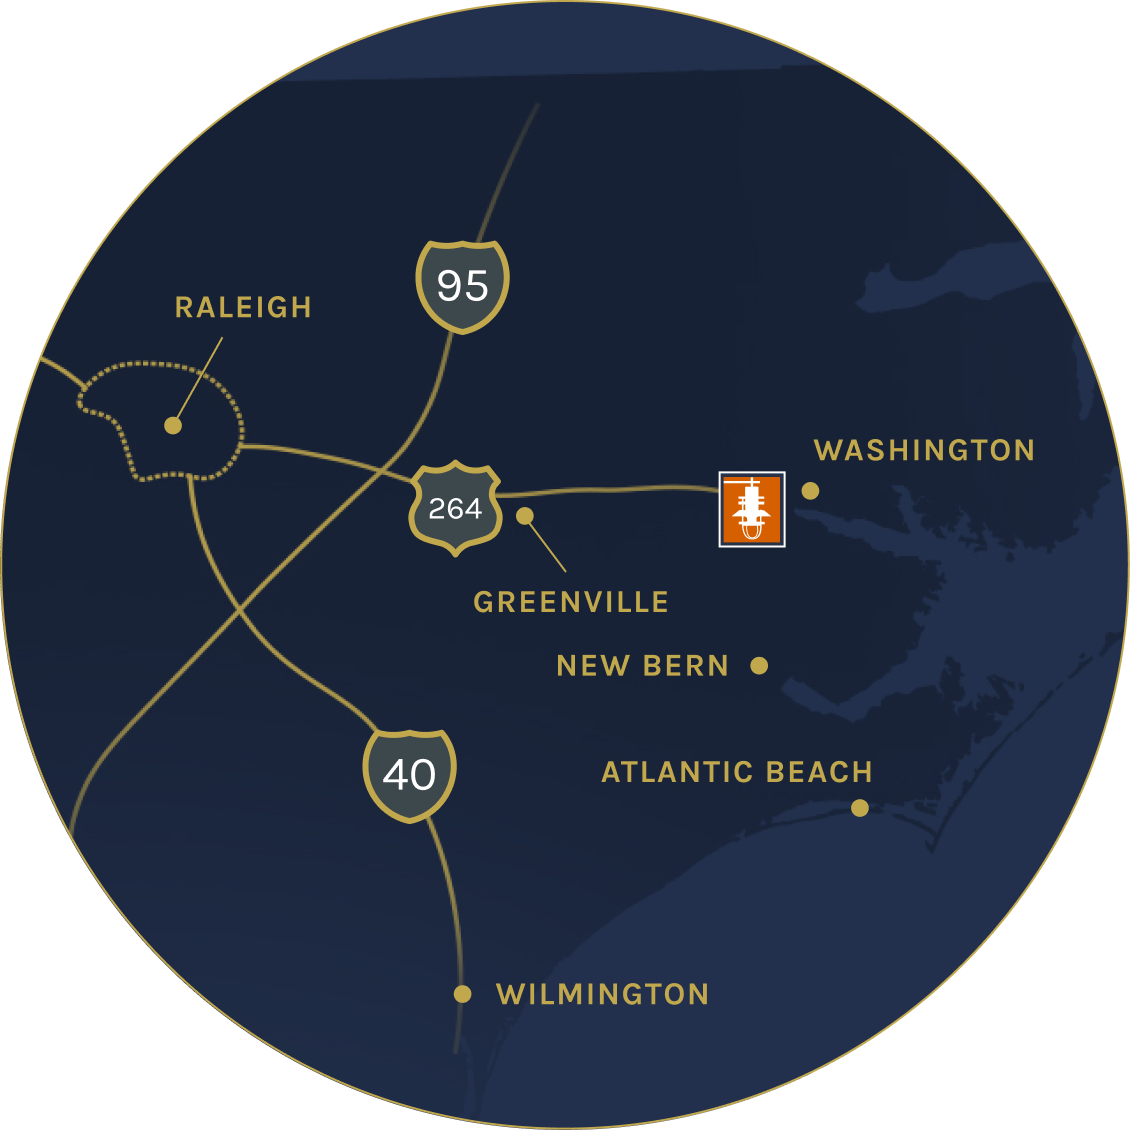 Locator map showing distance from Raleigh to Washington, North Carolina